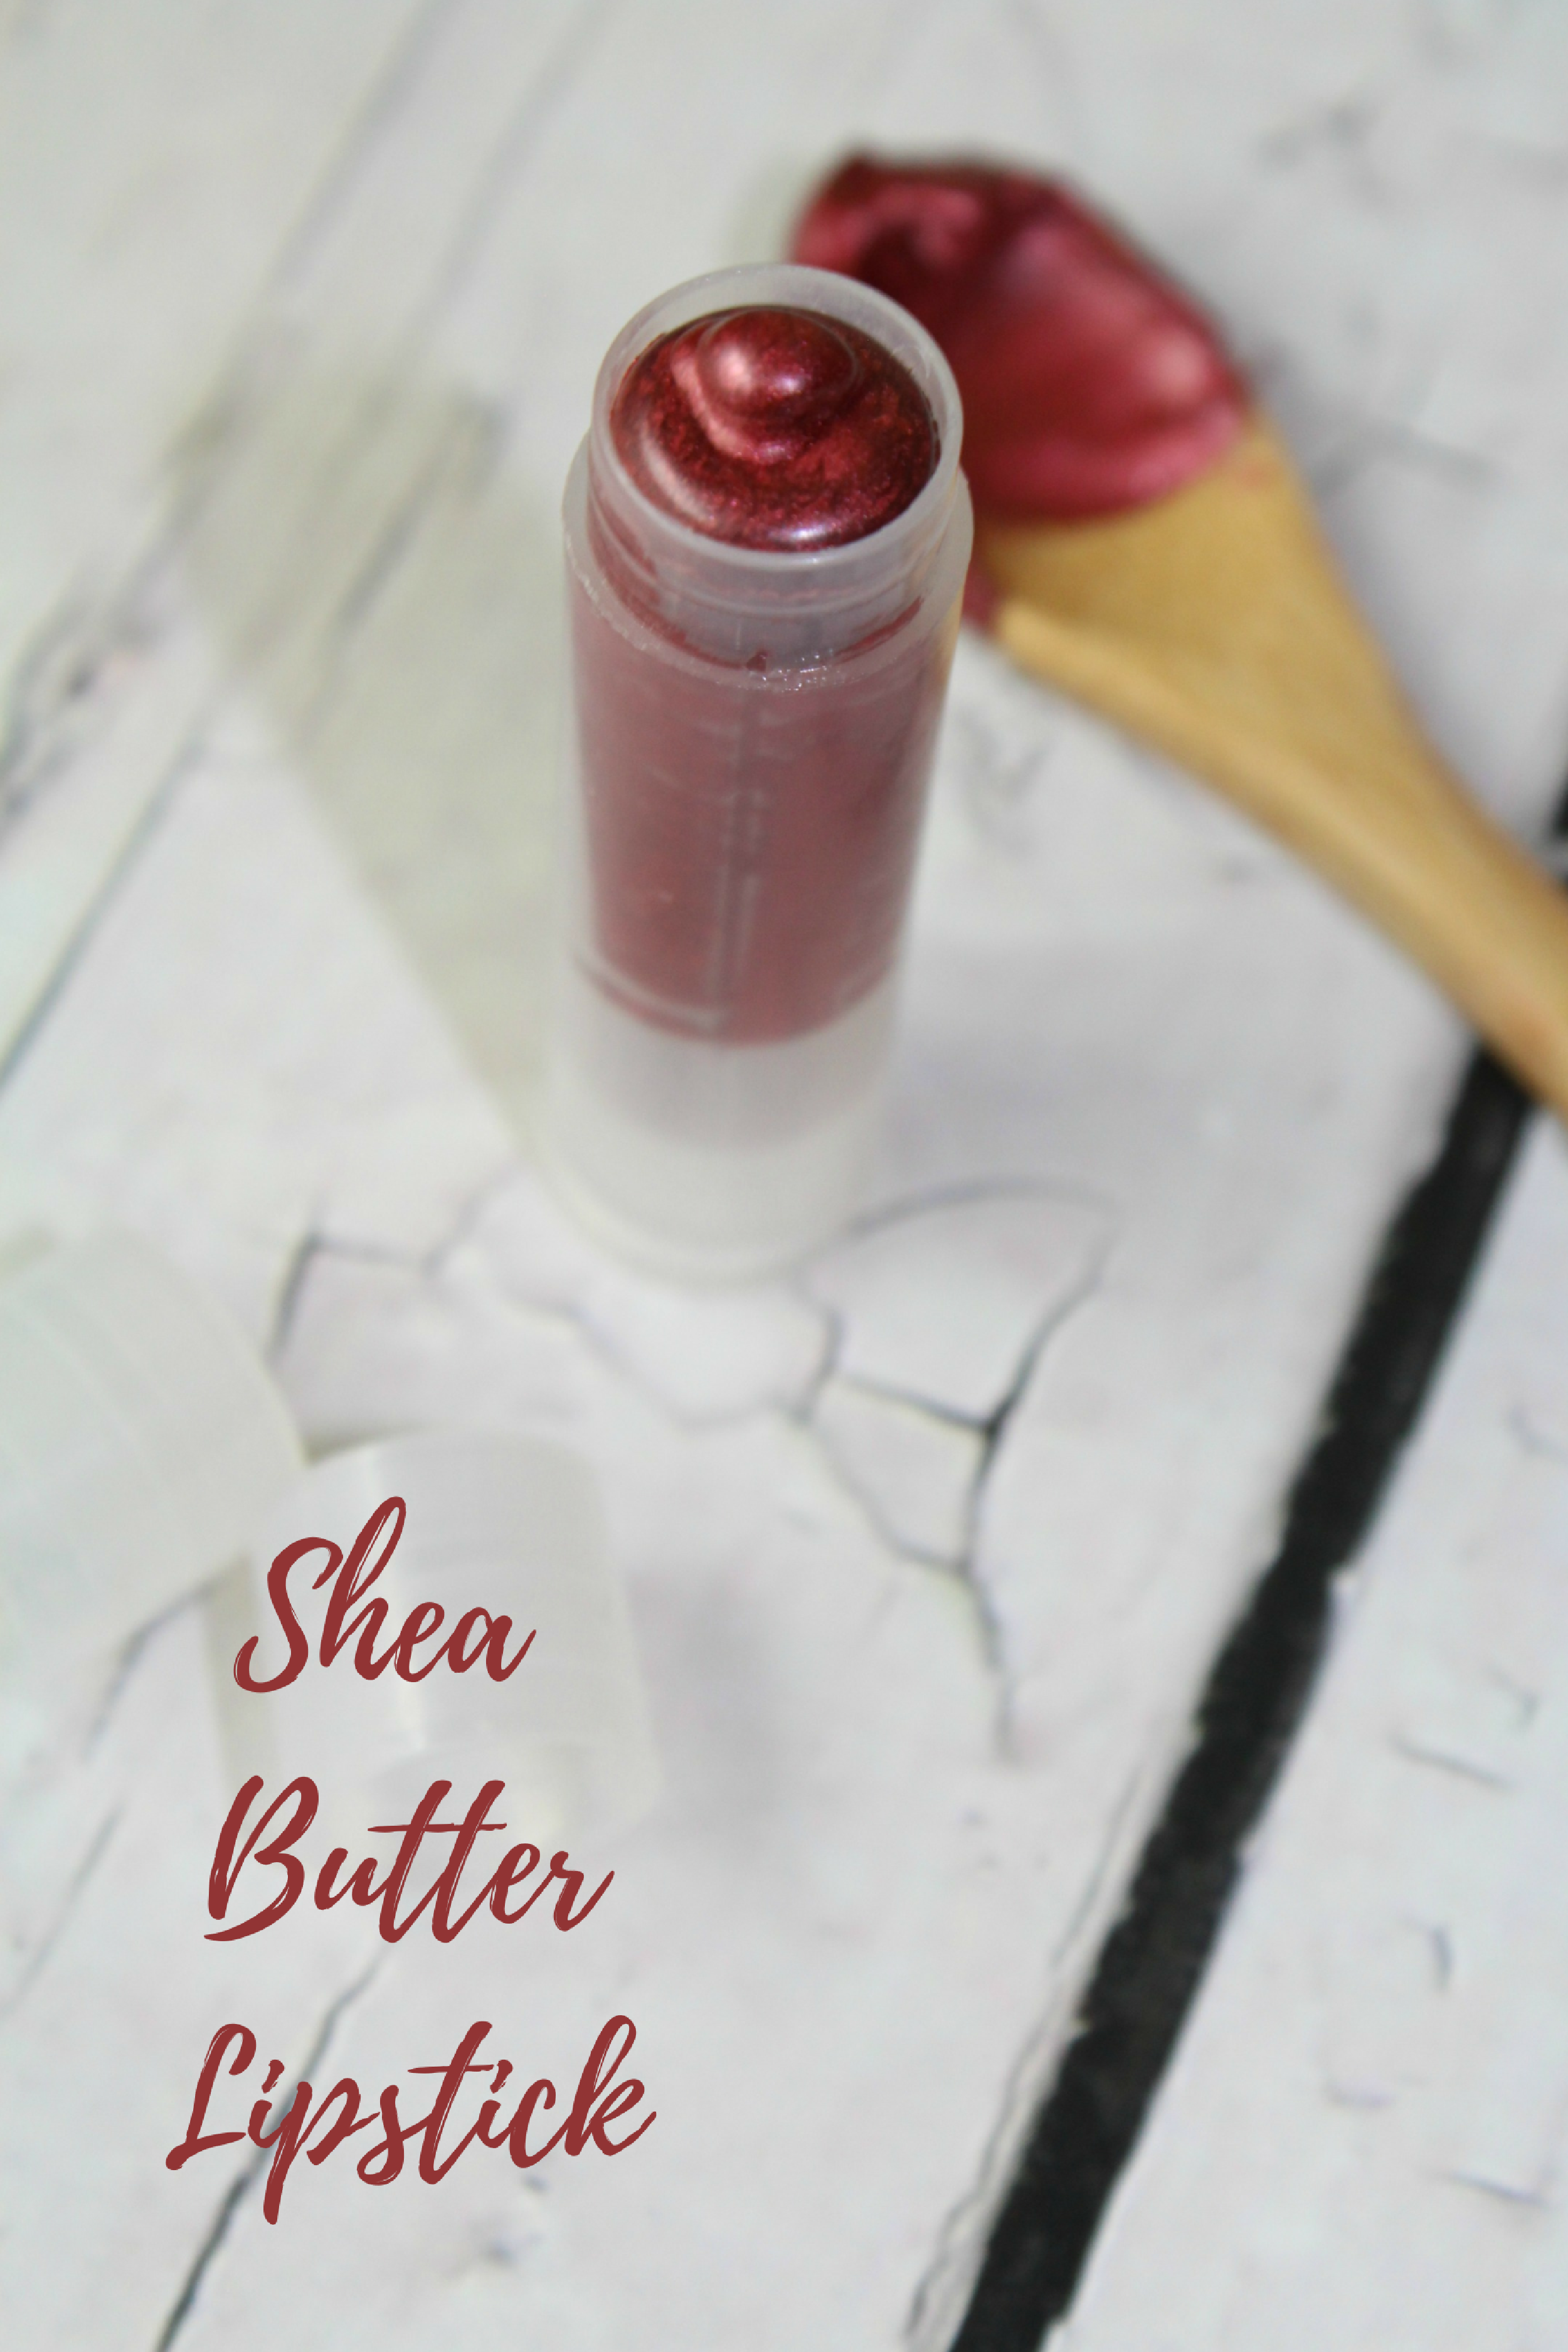 Tons of the conventional lipsticks out on the market right now contain toxic, heavy metals - including lead. With just a few simple ingredients you can whip up your own Shea Butter Lipstick and it works fabulous!